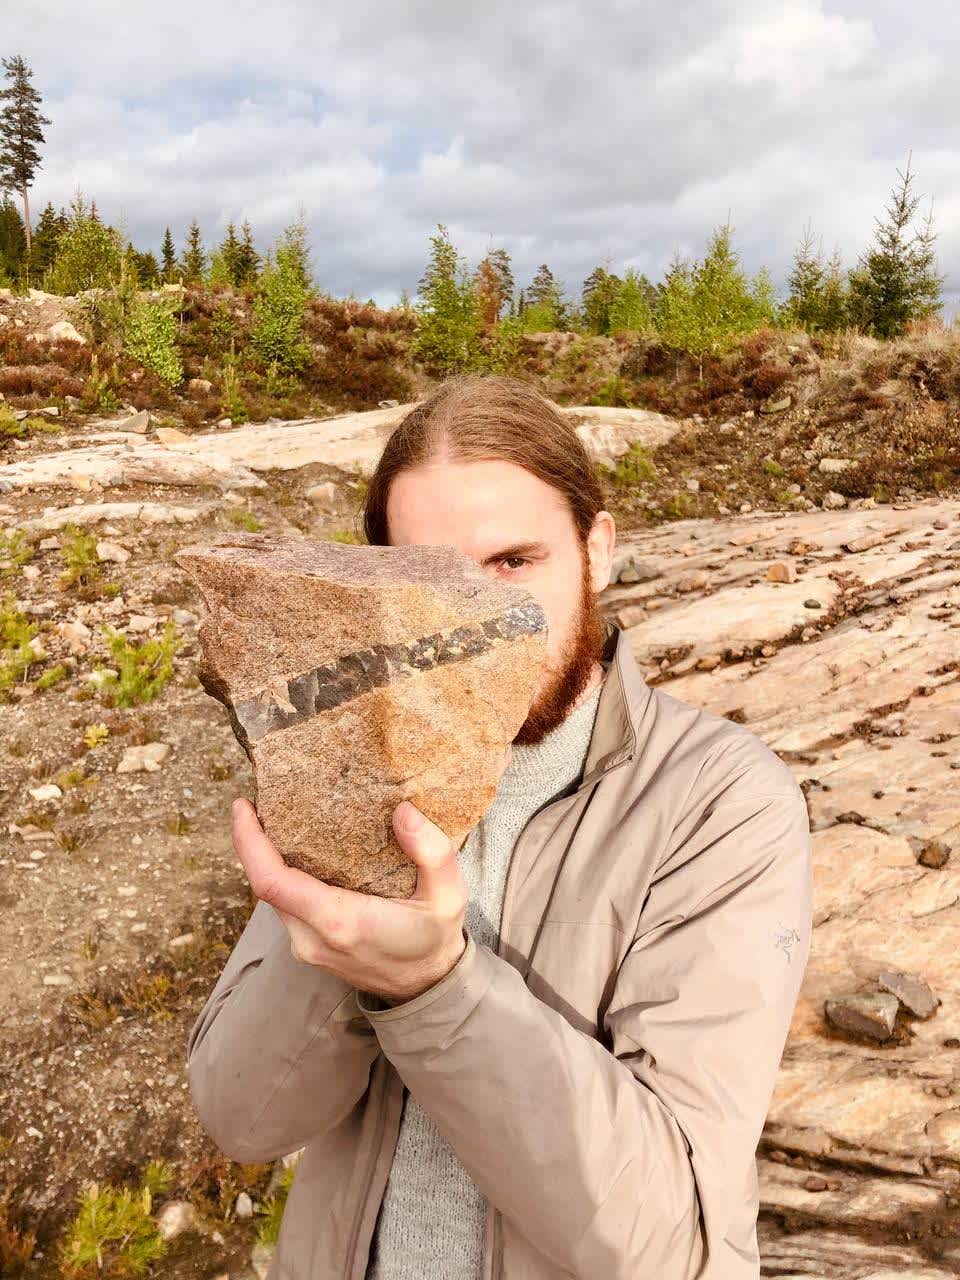 A picture of Jeroen Kortekaas holding a granite rock with a line of quartz veined through it, juxtaposed in front of his face, his right eye showing.